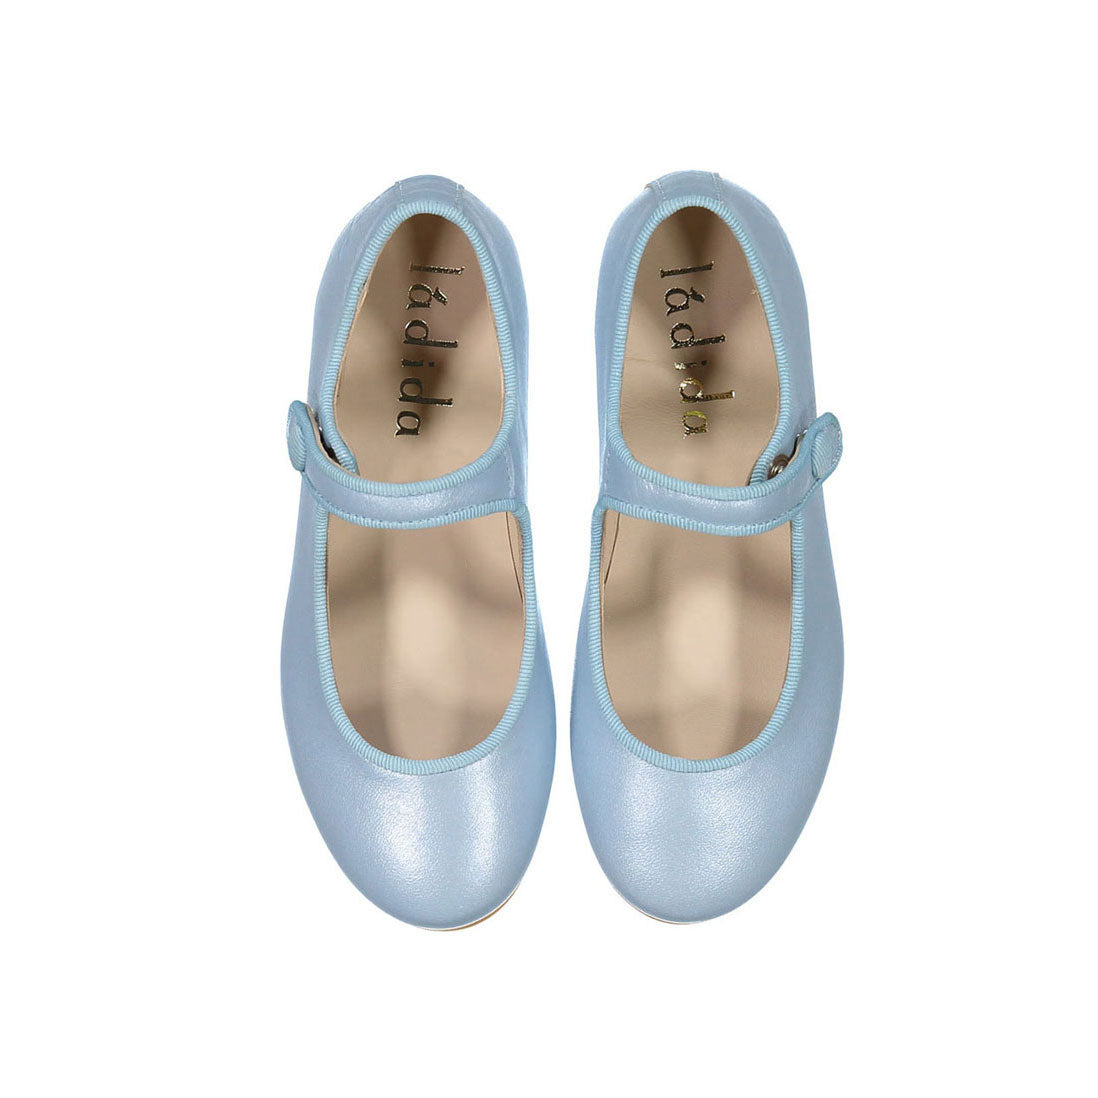 L By Ladida Light Blue Mary Janes